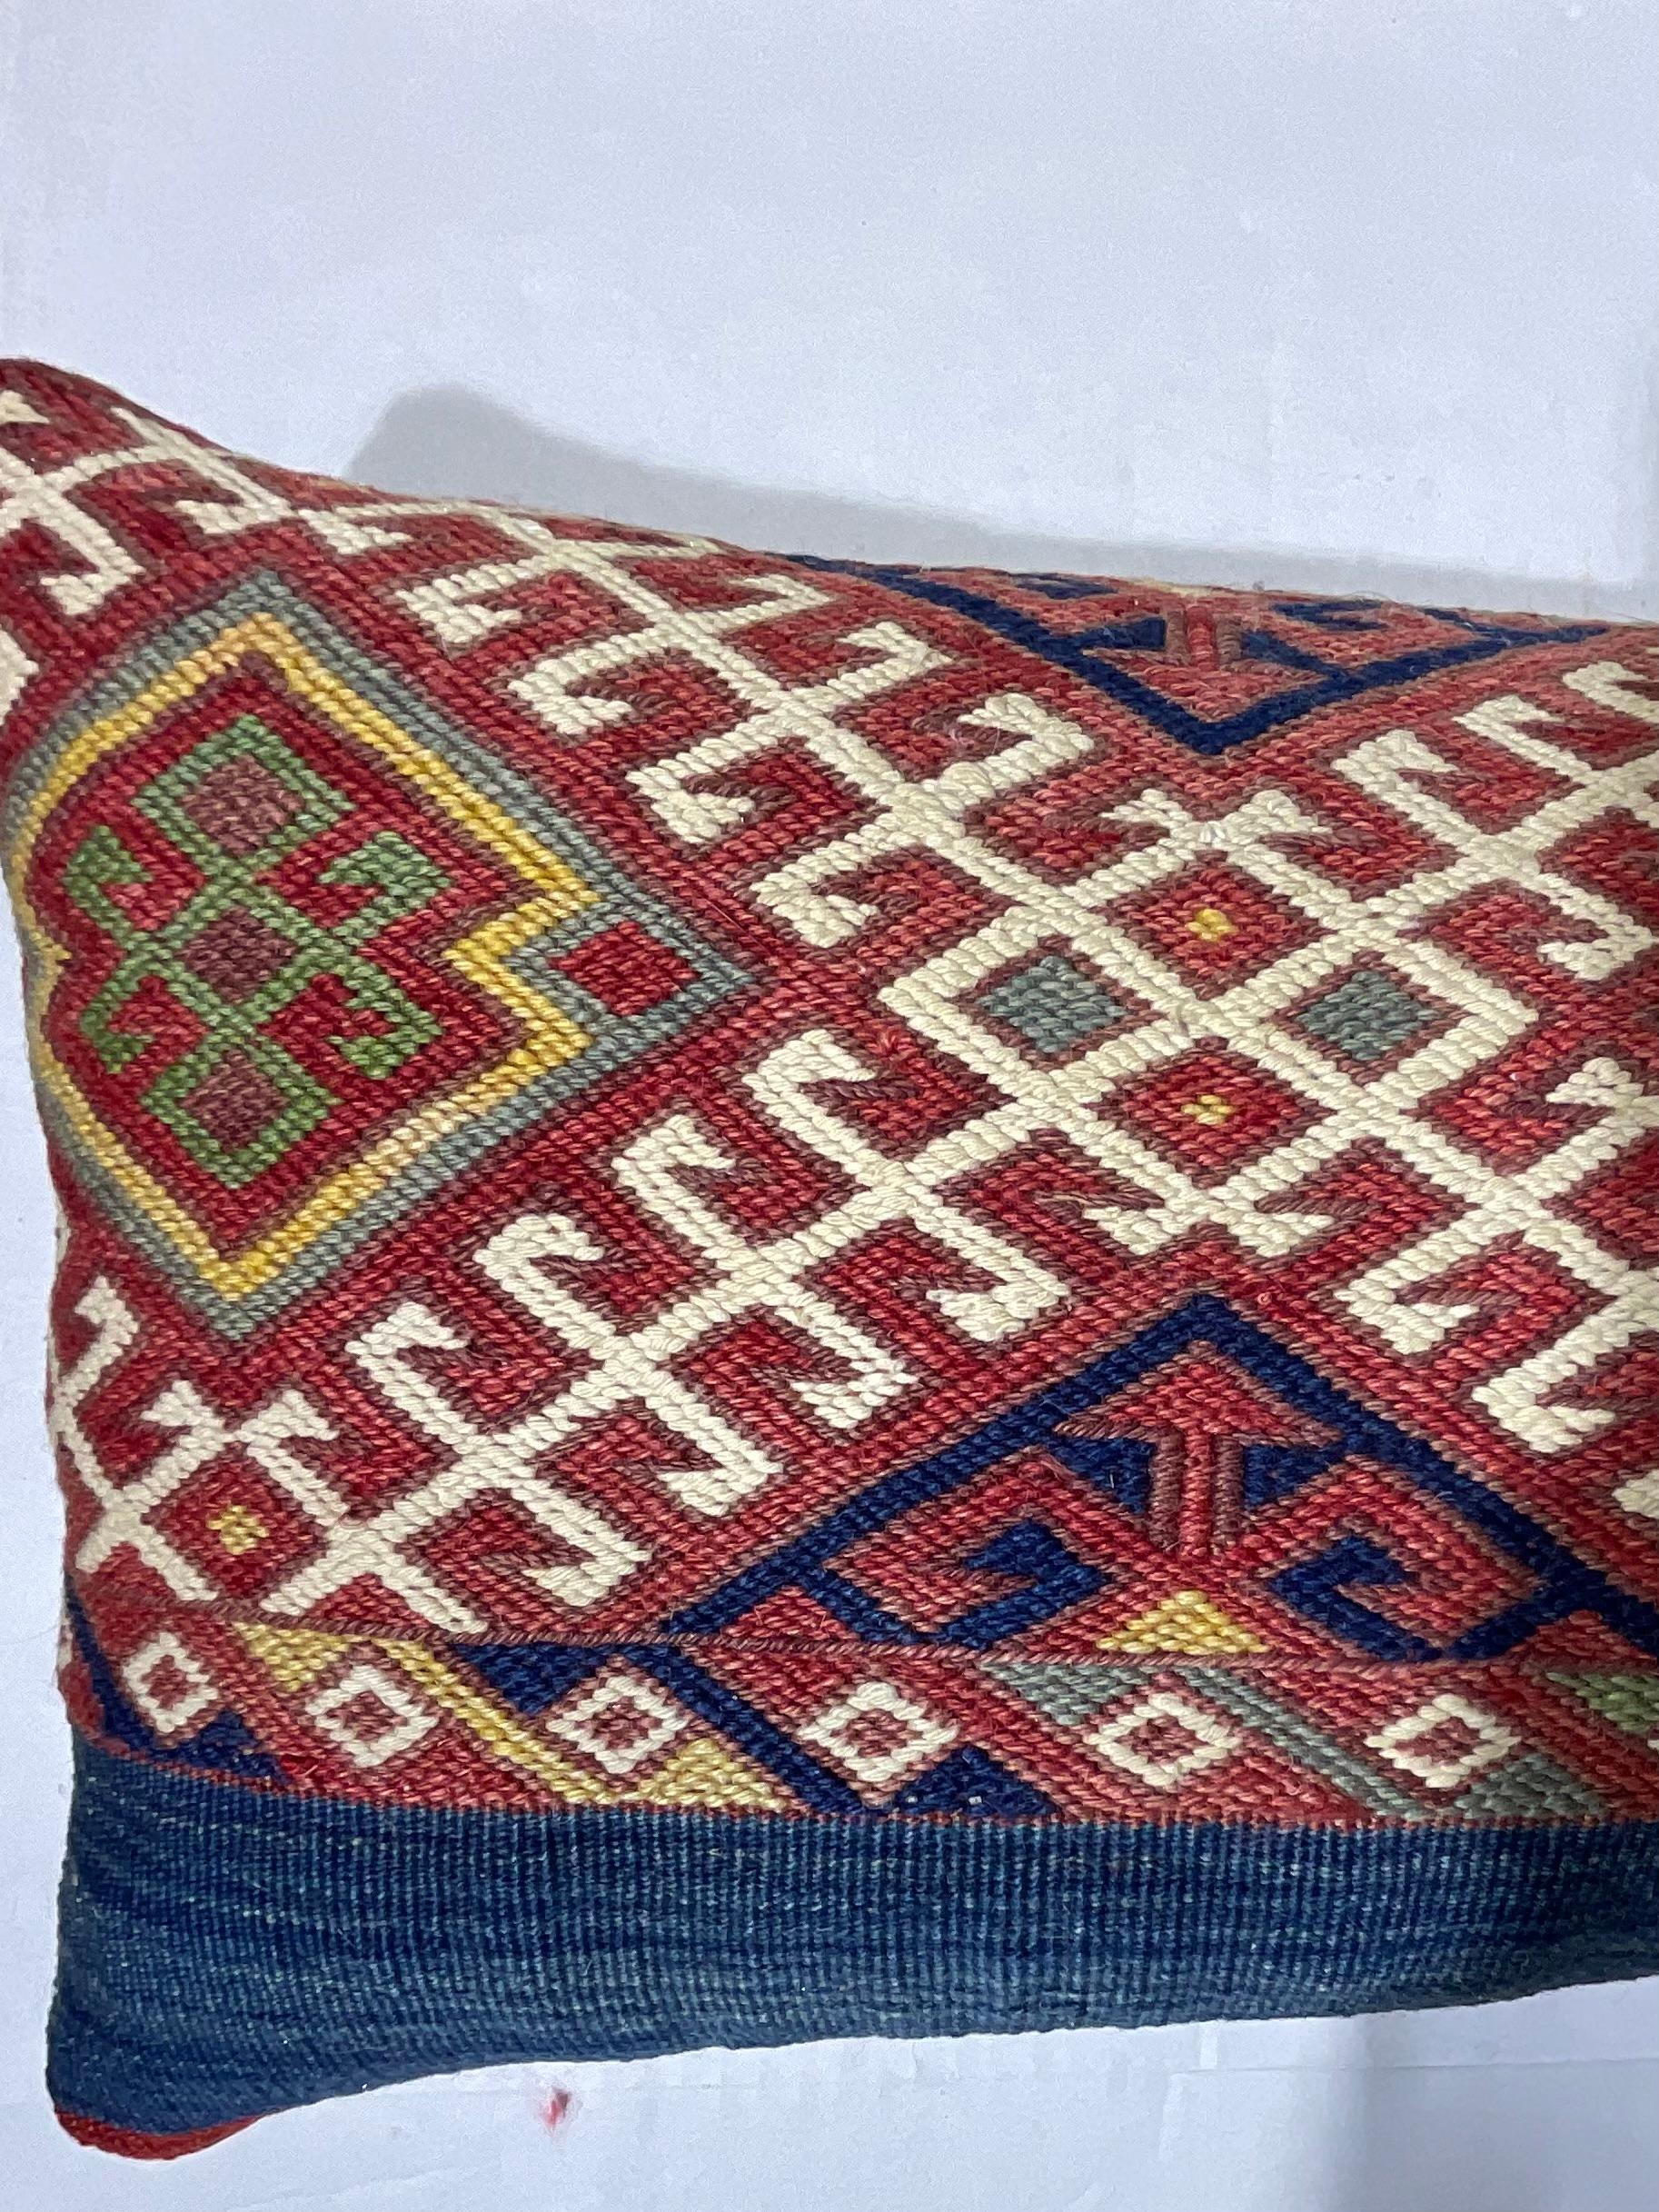 Hand-Knotted Flat-Weave Geometric Motif Kilim Rug Fragment Pillow For Sale